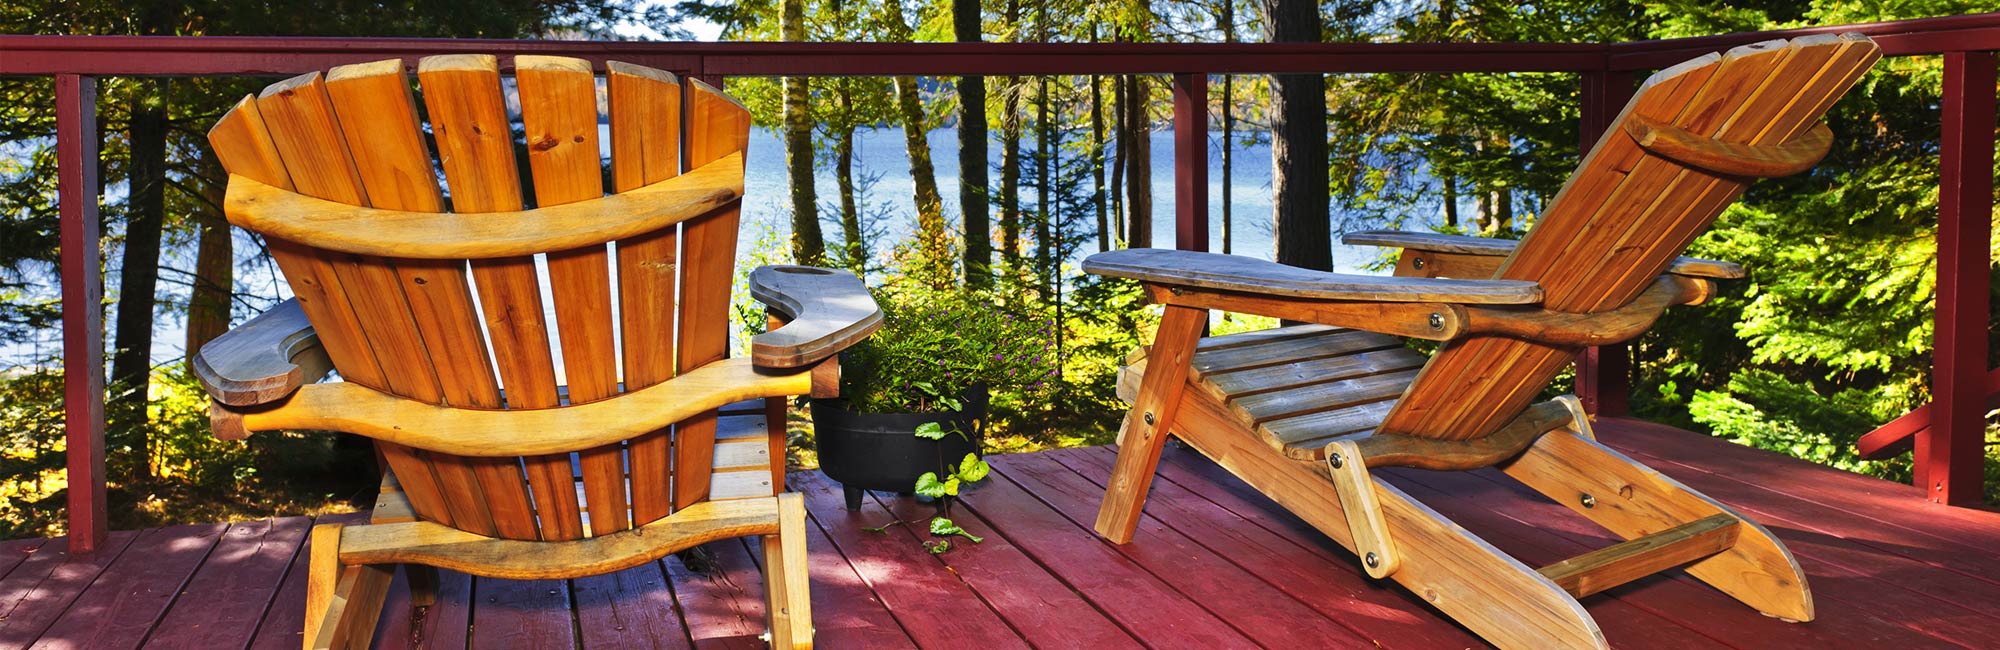 Lawn chairs on deck overlooking lake